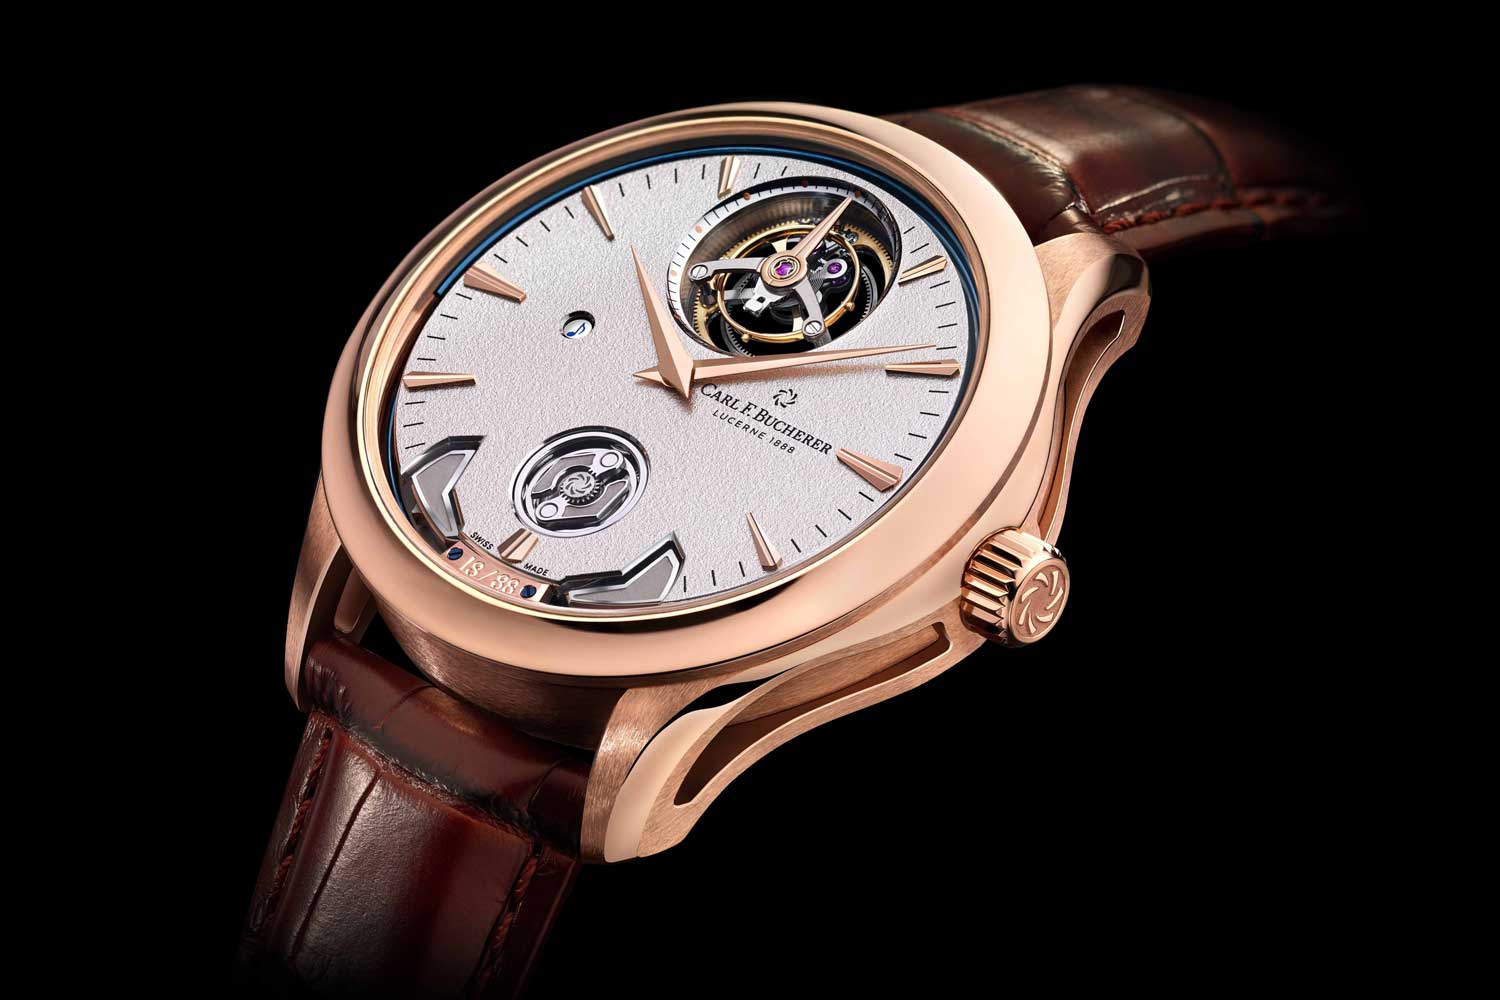 Introduced at Watches and Wonders 2021, the Manero Minute Repeater Symphony boasts not only Carl F. Bucherer’s Peripheral Winding System and floating Peripheral Tourbillon but also a third peripheral mechanism, the watch’s COSC certified Calibre CFB MR3000 is “Triple Peripheral”.